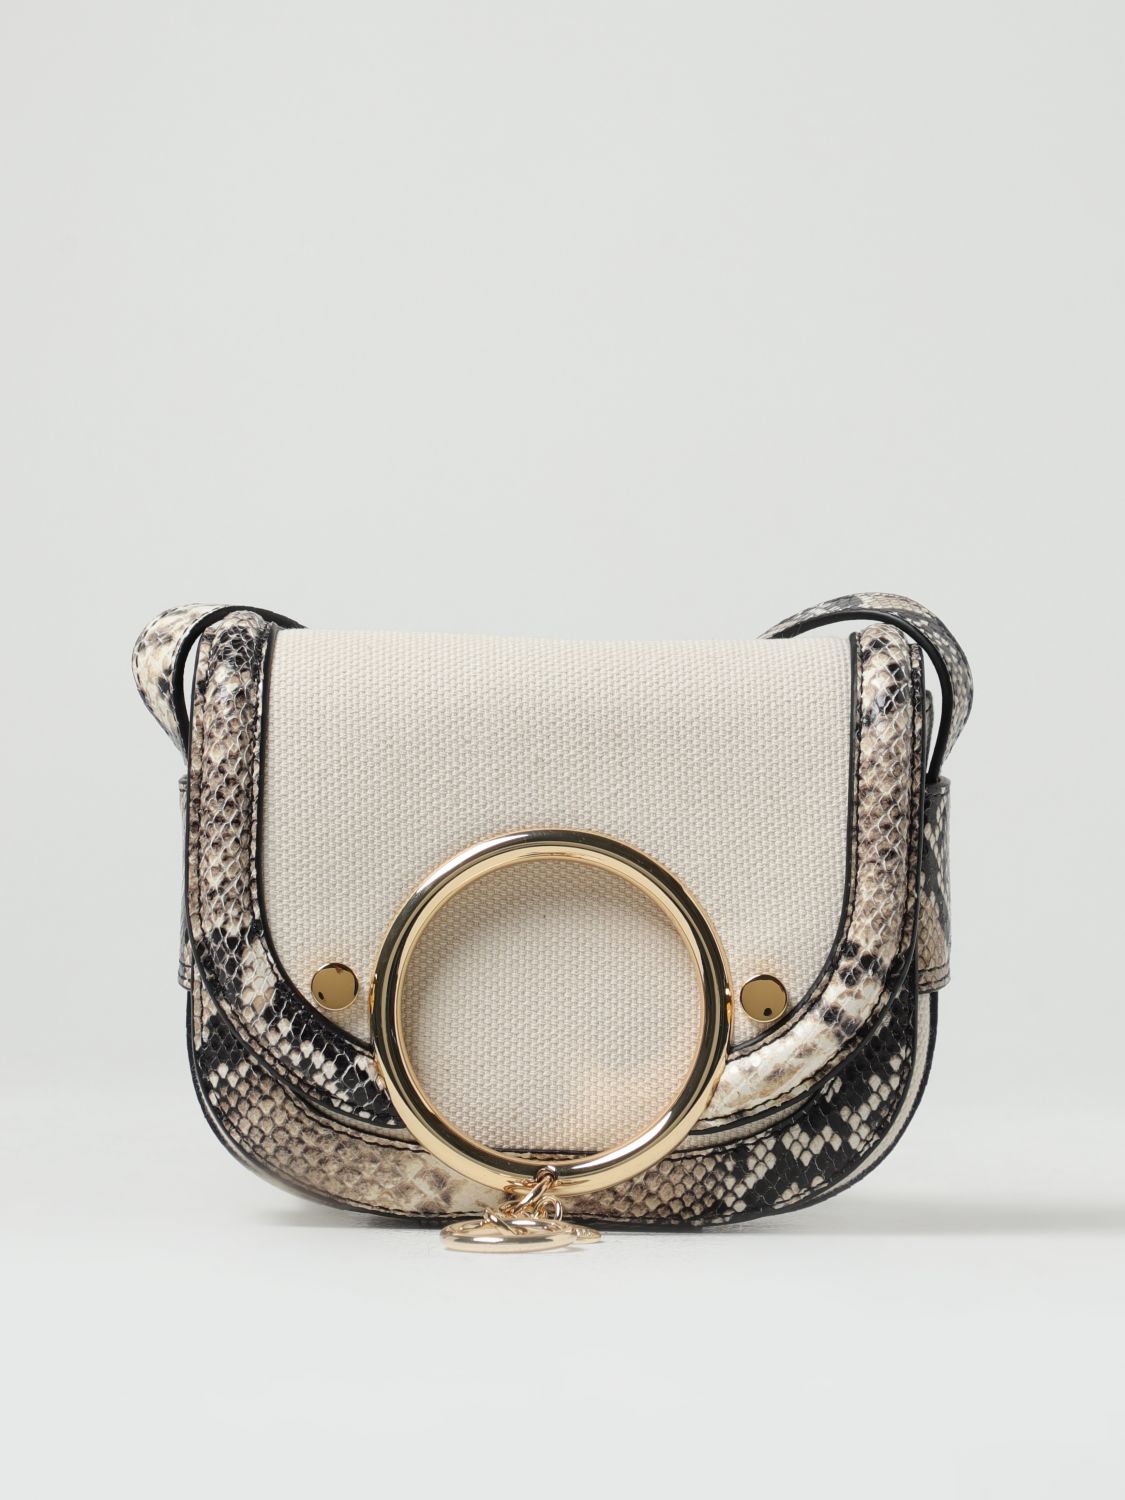 SEE BY CHLOÉ MARA BAG IN PYTHON PRINT LEATHER AND COTTON CANVAS,E87919022